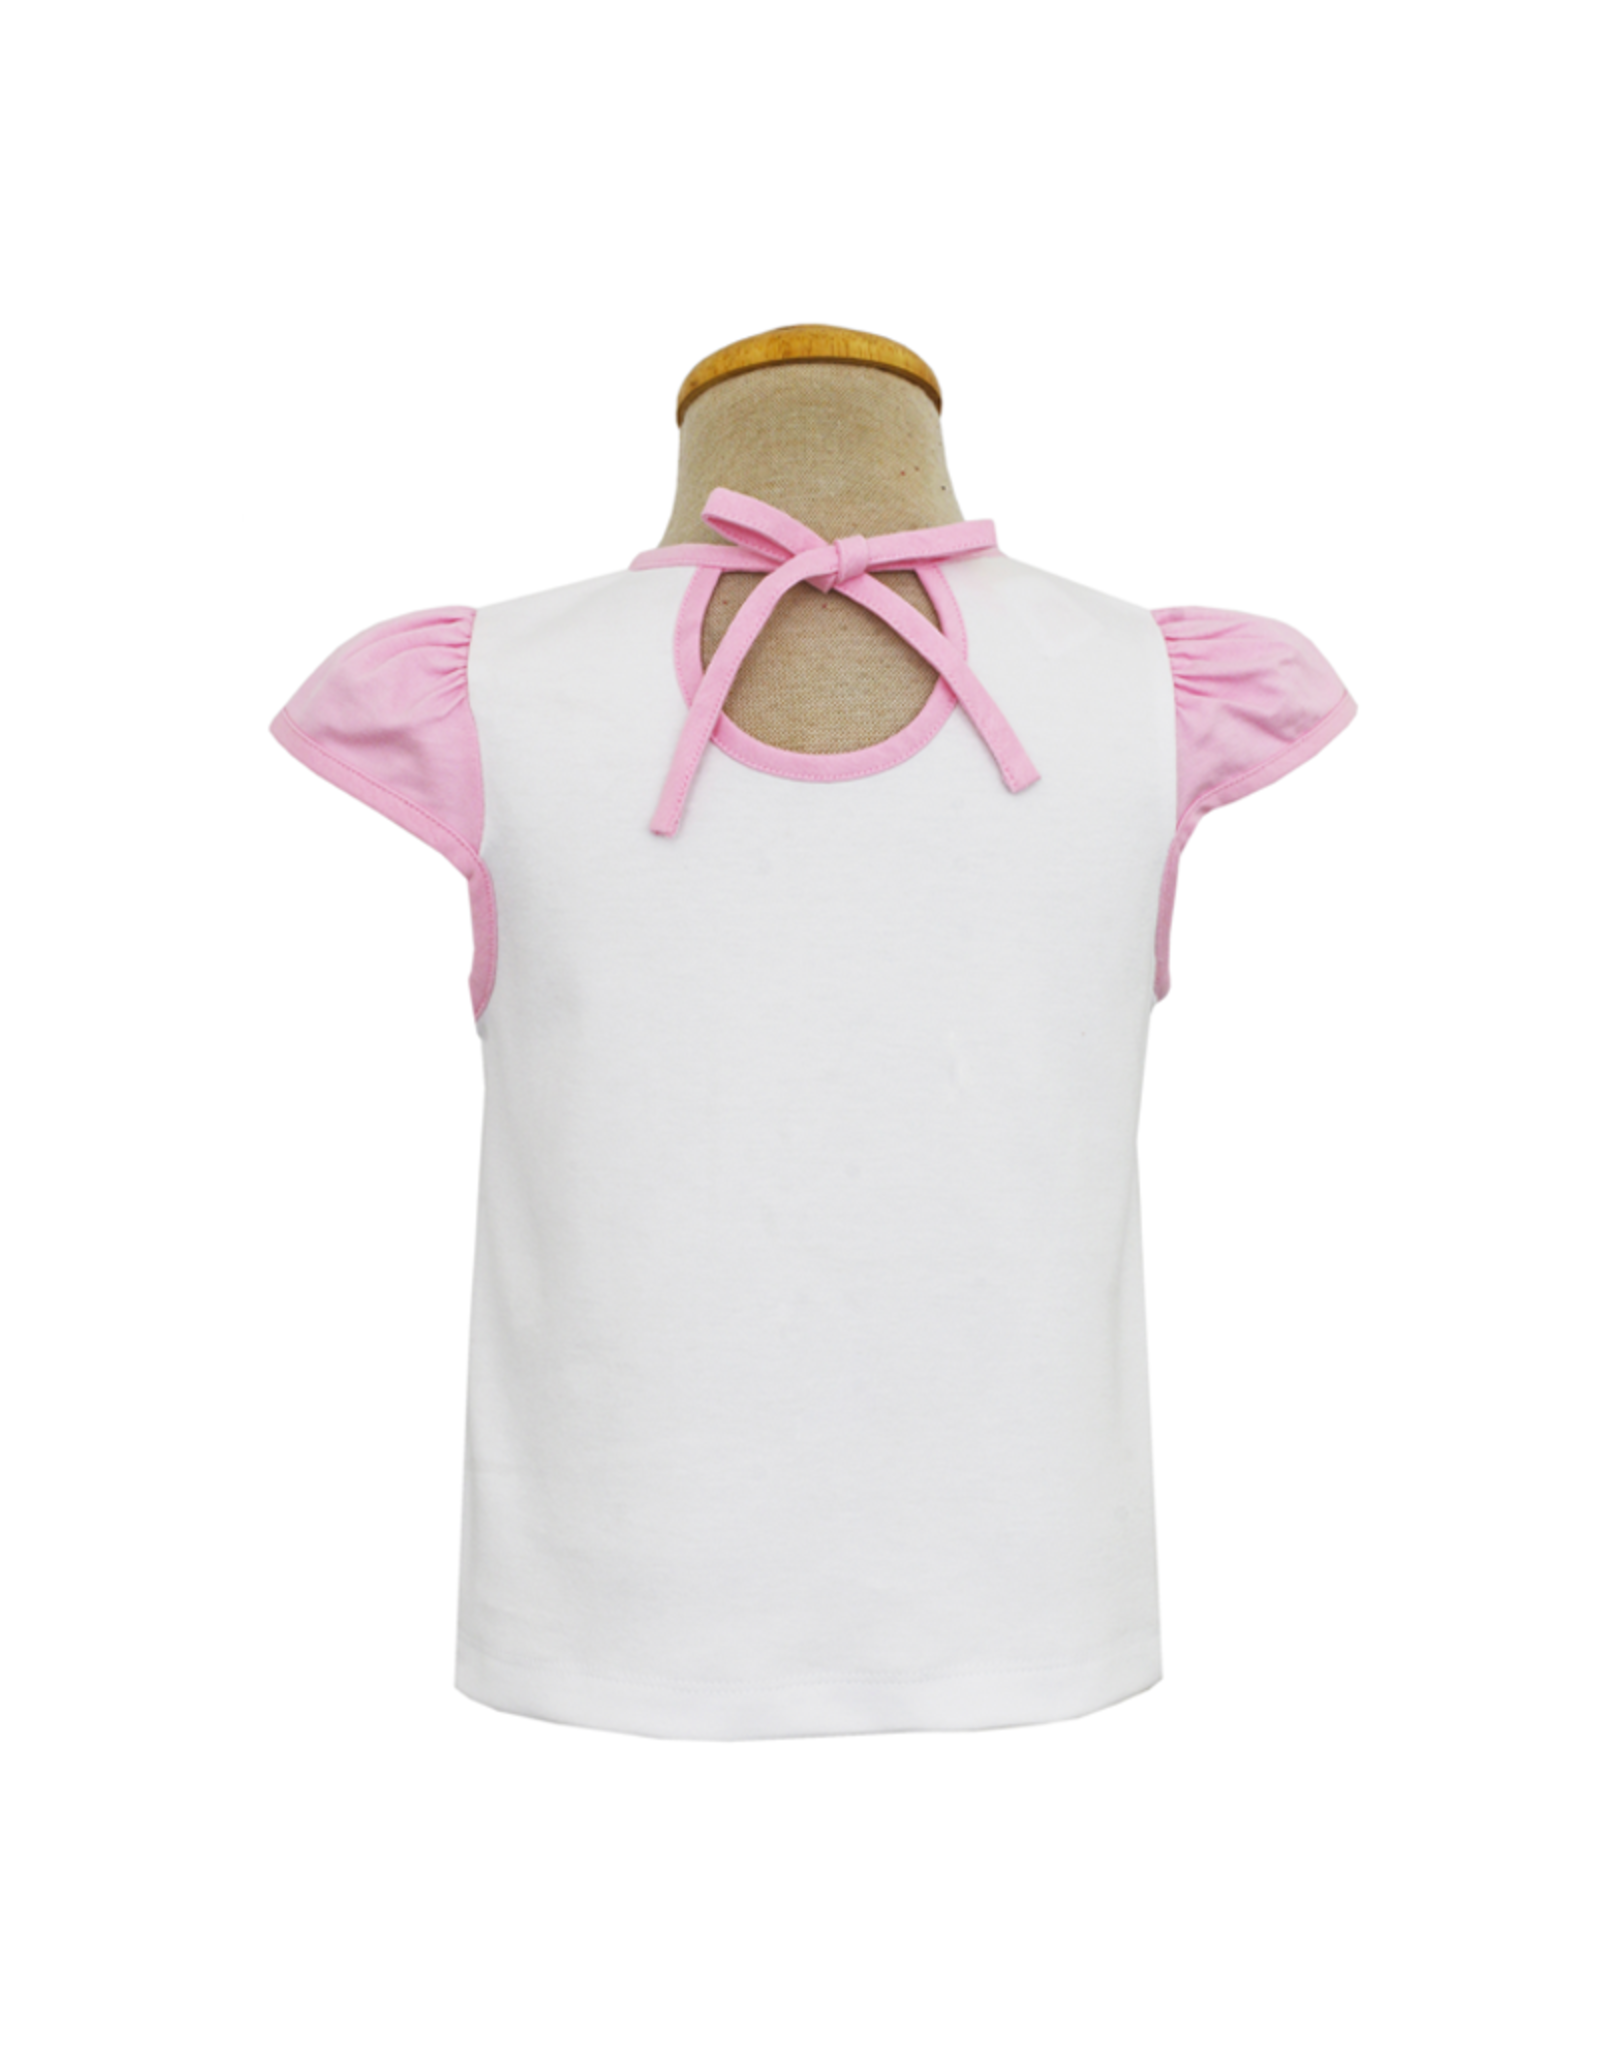 Claire and Charlie 5009Q Girl Birthday Shirt